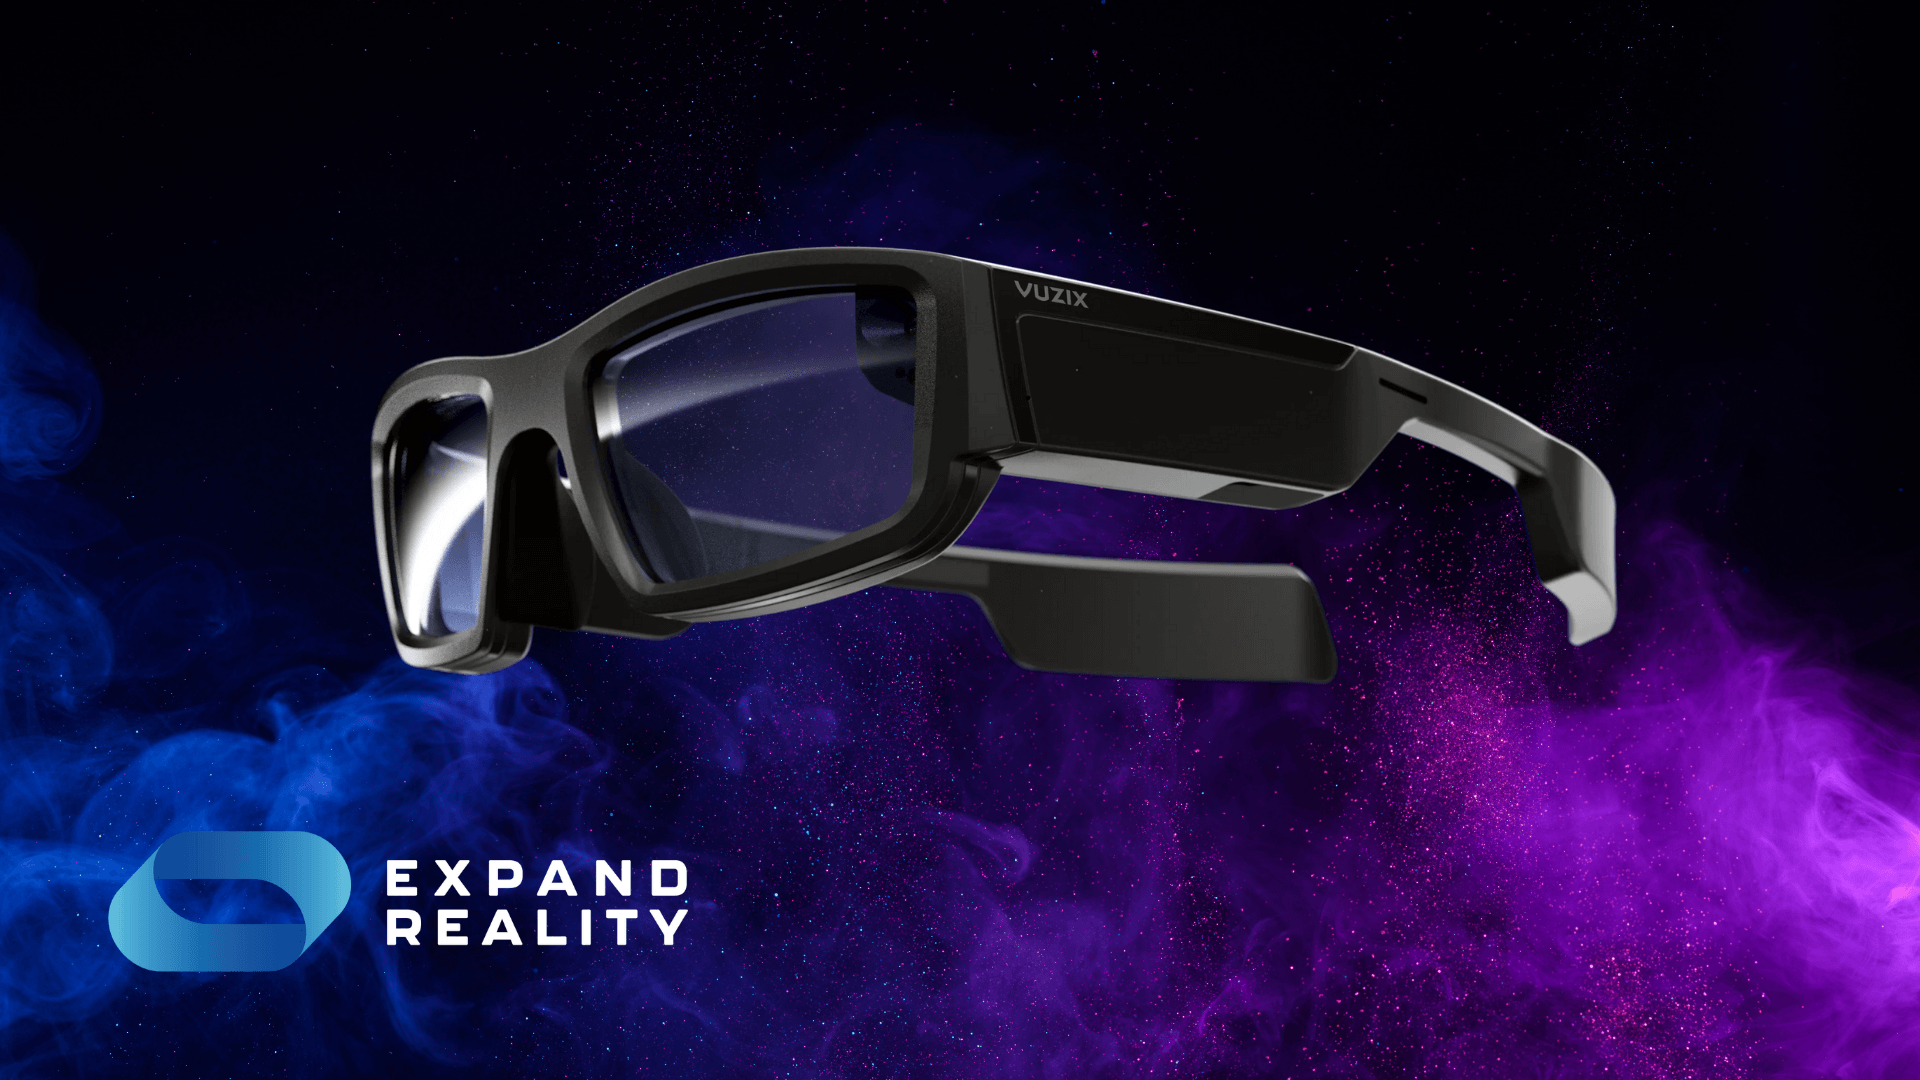 What are the Vuzix Blade smart glasses, and what can they do for your business? Learn the facts, specs and features in our XR device deep dive.